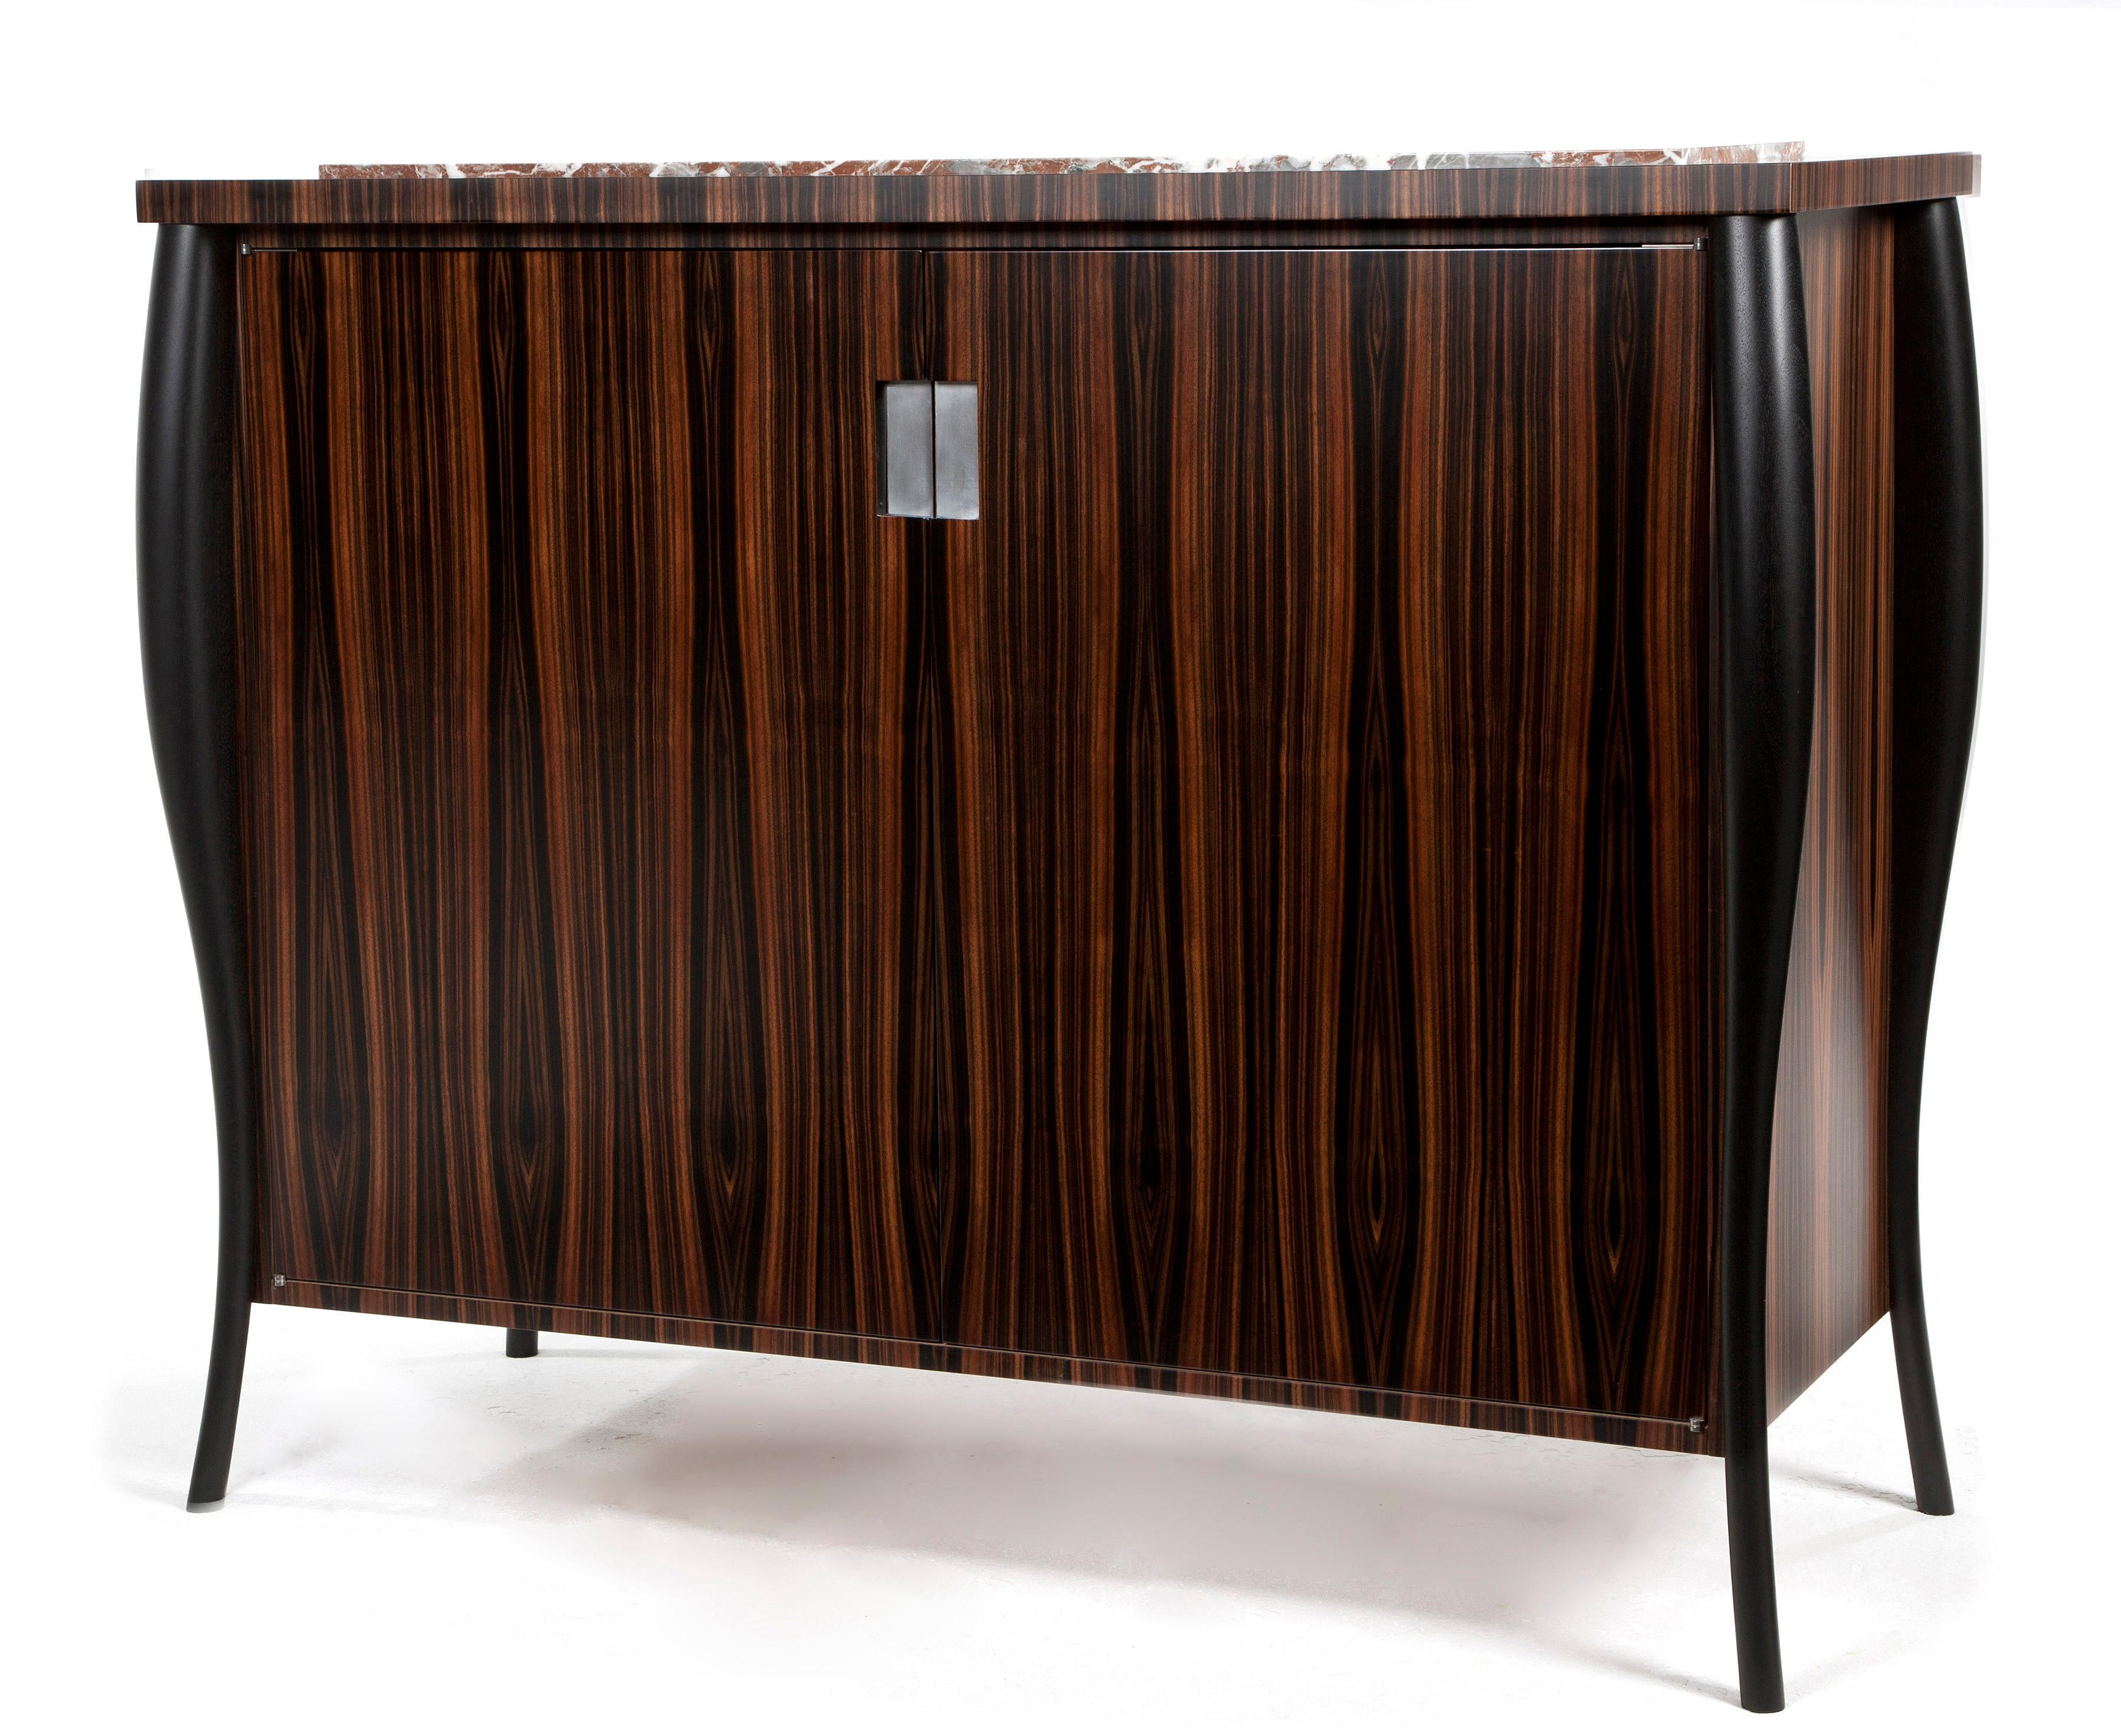 Book-matched Macassar ebony drinks cabinet. 
The hand-sculpted legs in ebonised walnut and waterfall veneer edging encase a beautiful Irish stone top. 

The interior of the cabinet is made from ripple sycamore and the inset handles are finished with